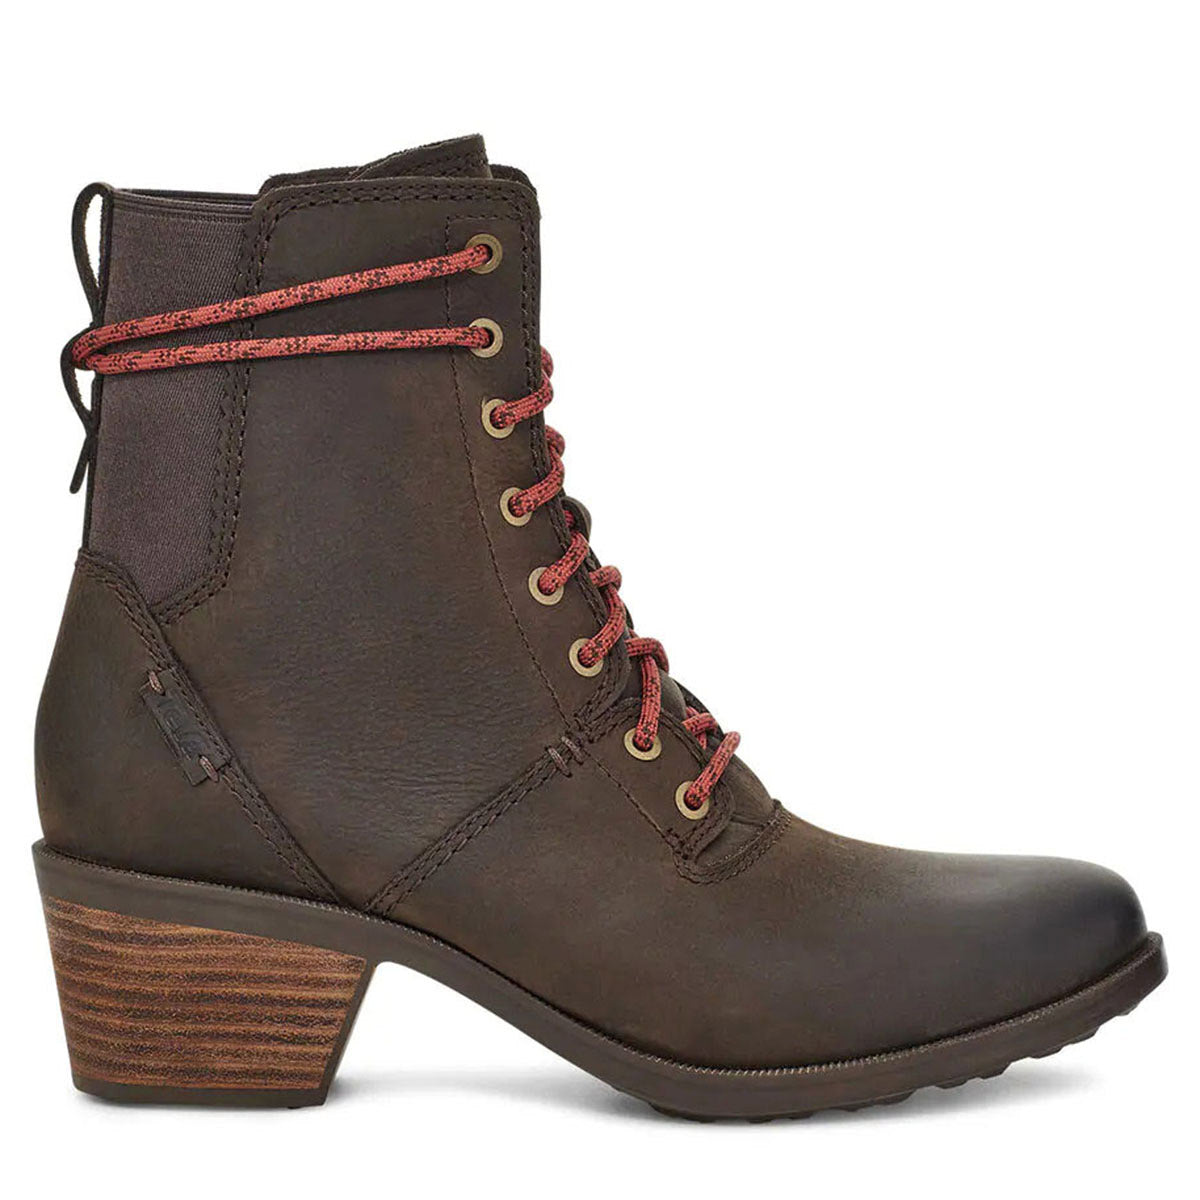 Brown leather heeled ankle boot with red laces and a rubber outsole, like the Teva Anaya Lace Up Chocolate - Womens.